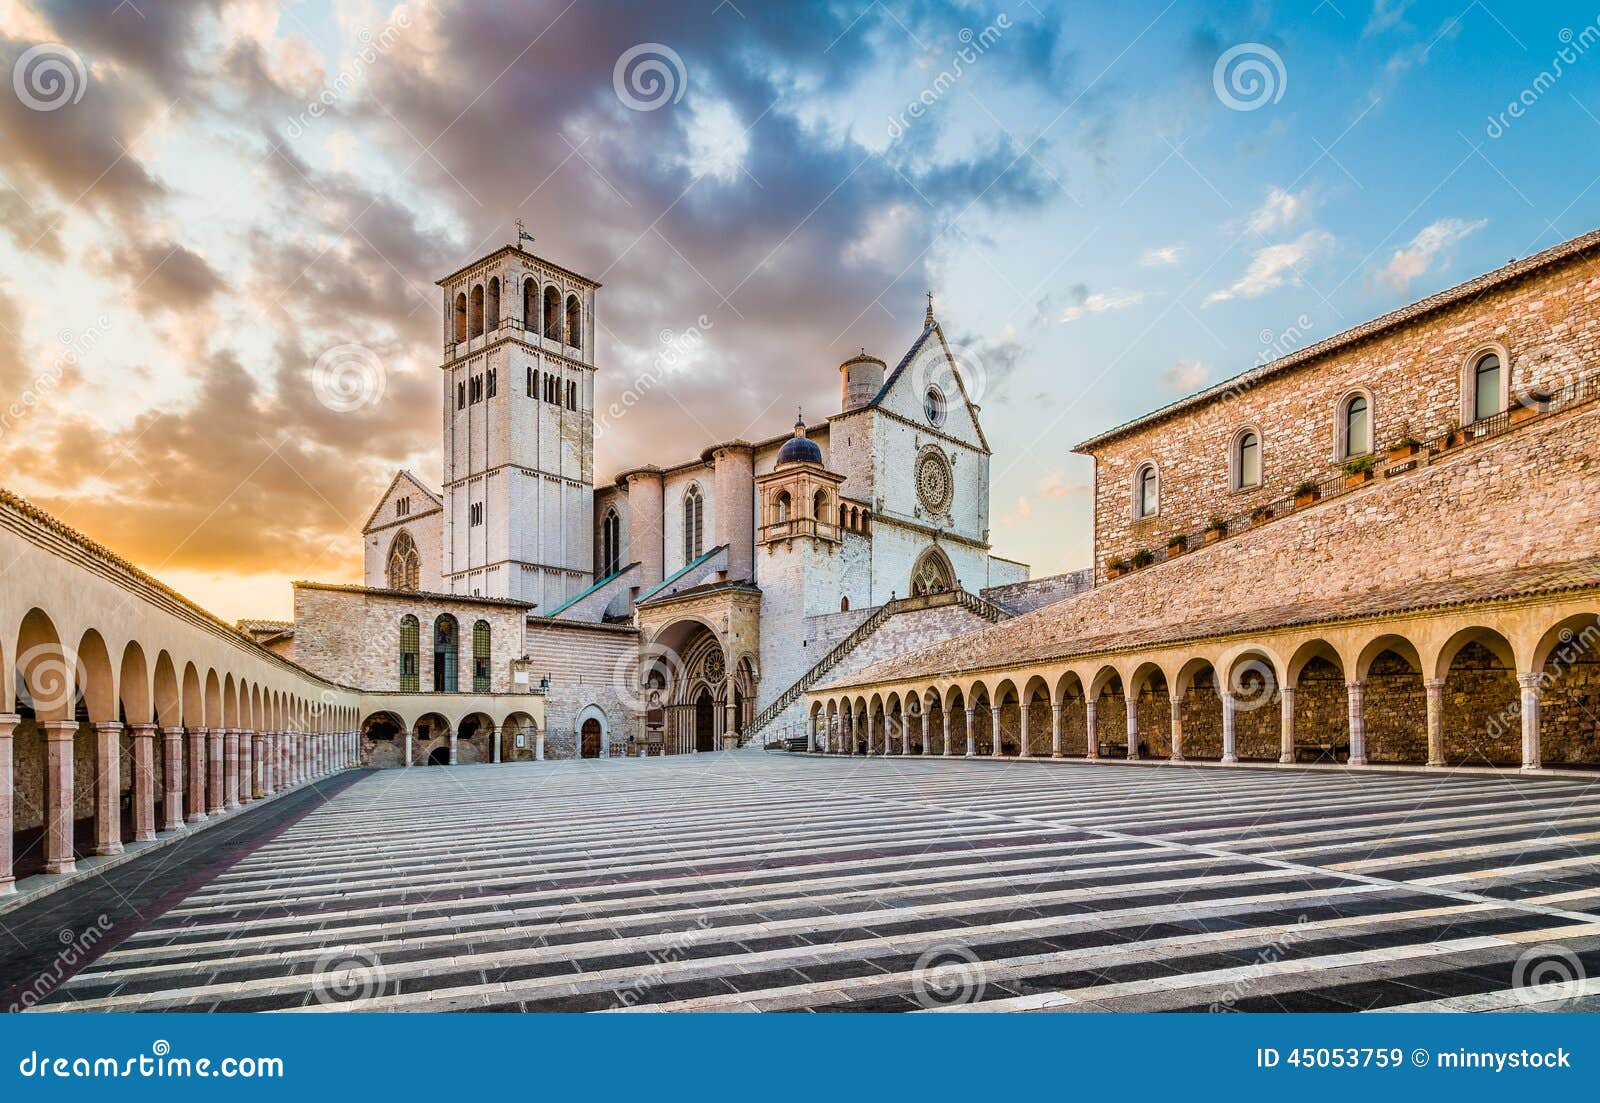 basilica of st. francis of assisi at sunset in assisi, umbria, italy